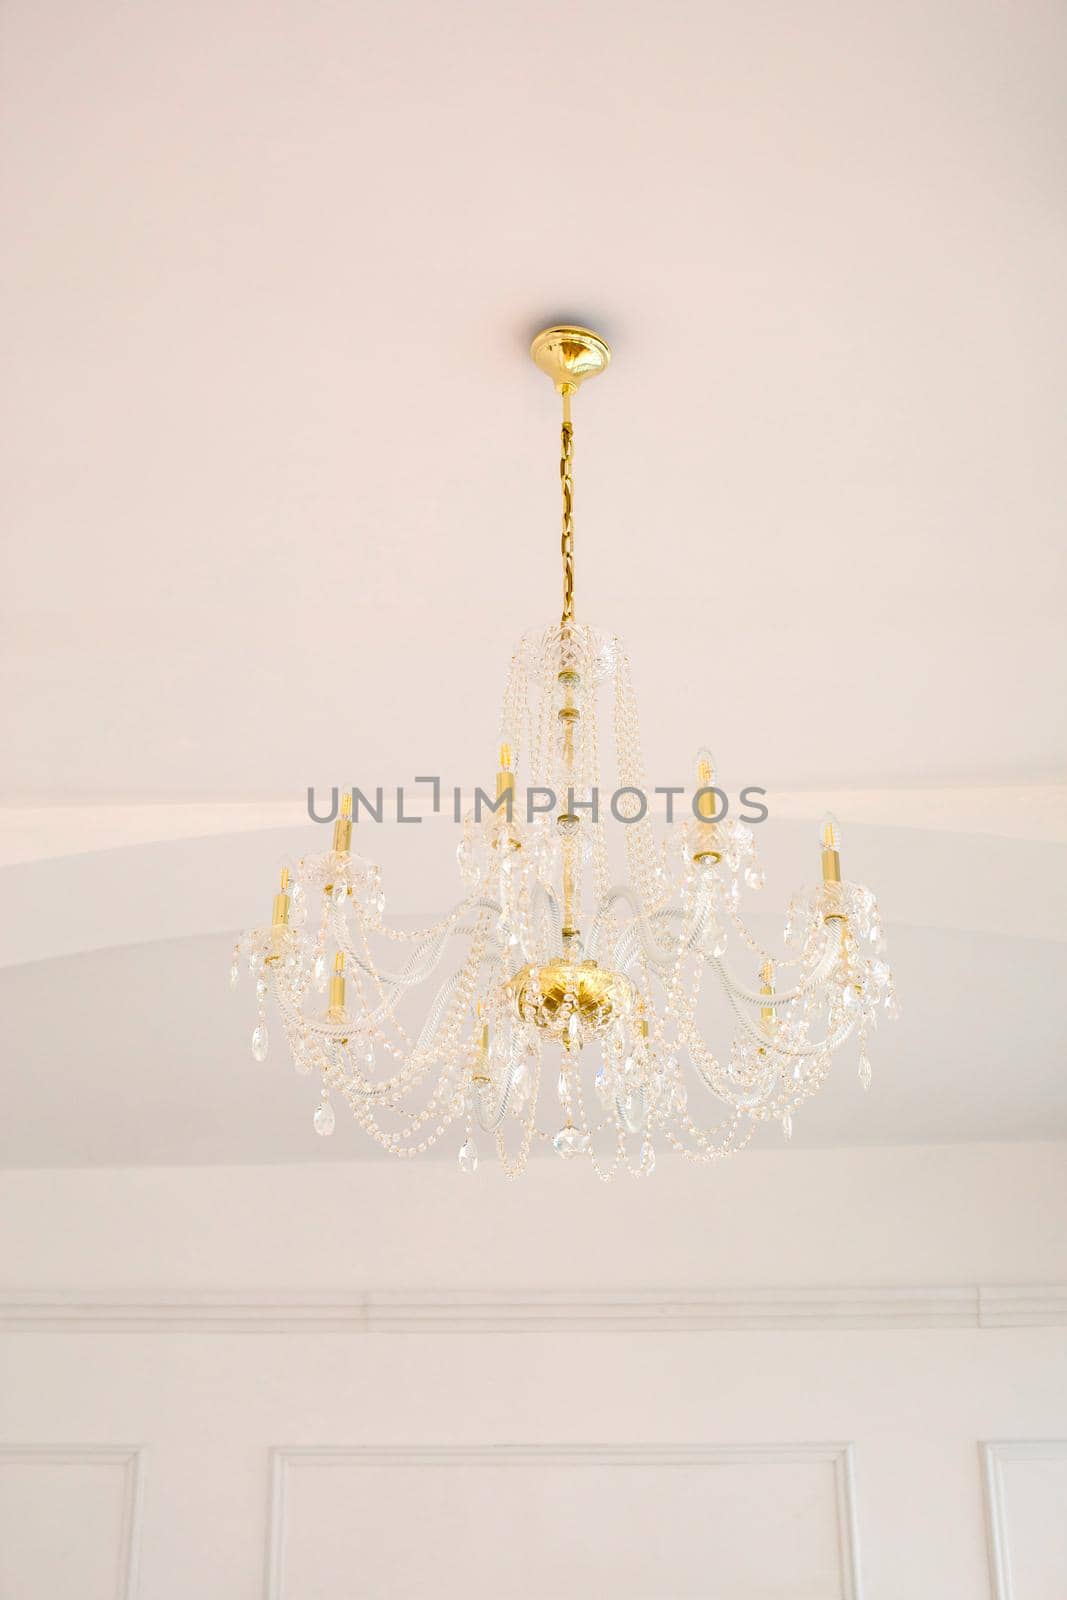 From below of classic elegant golden chandelier with crystal pendants hanging on white ceiling in light room